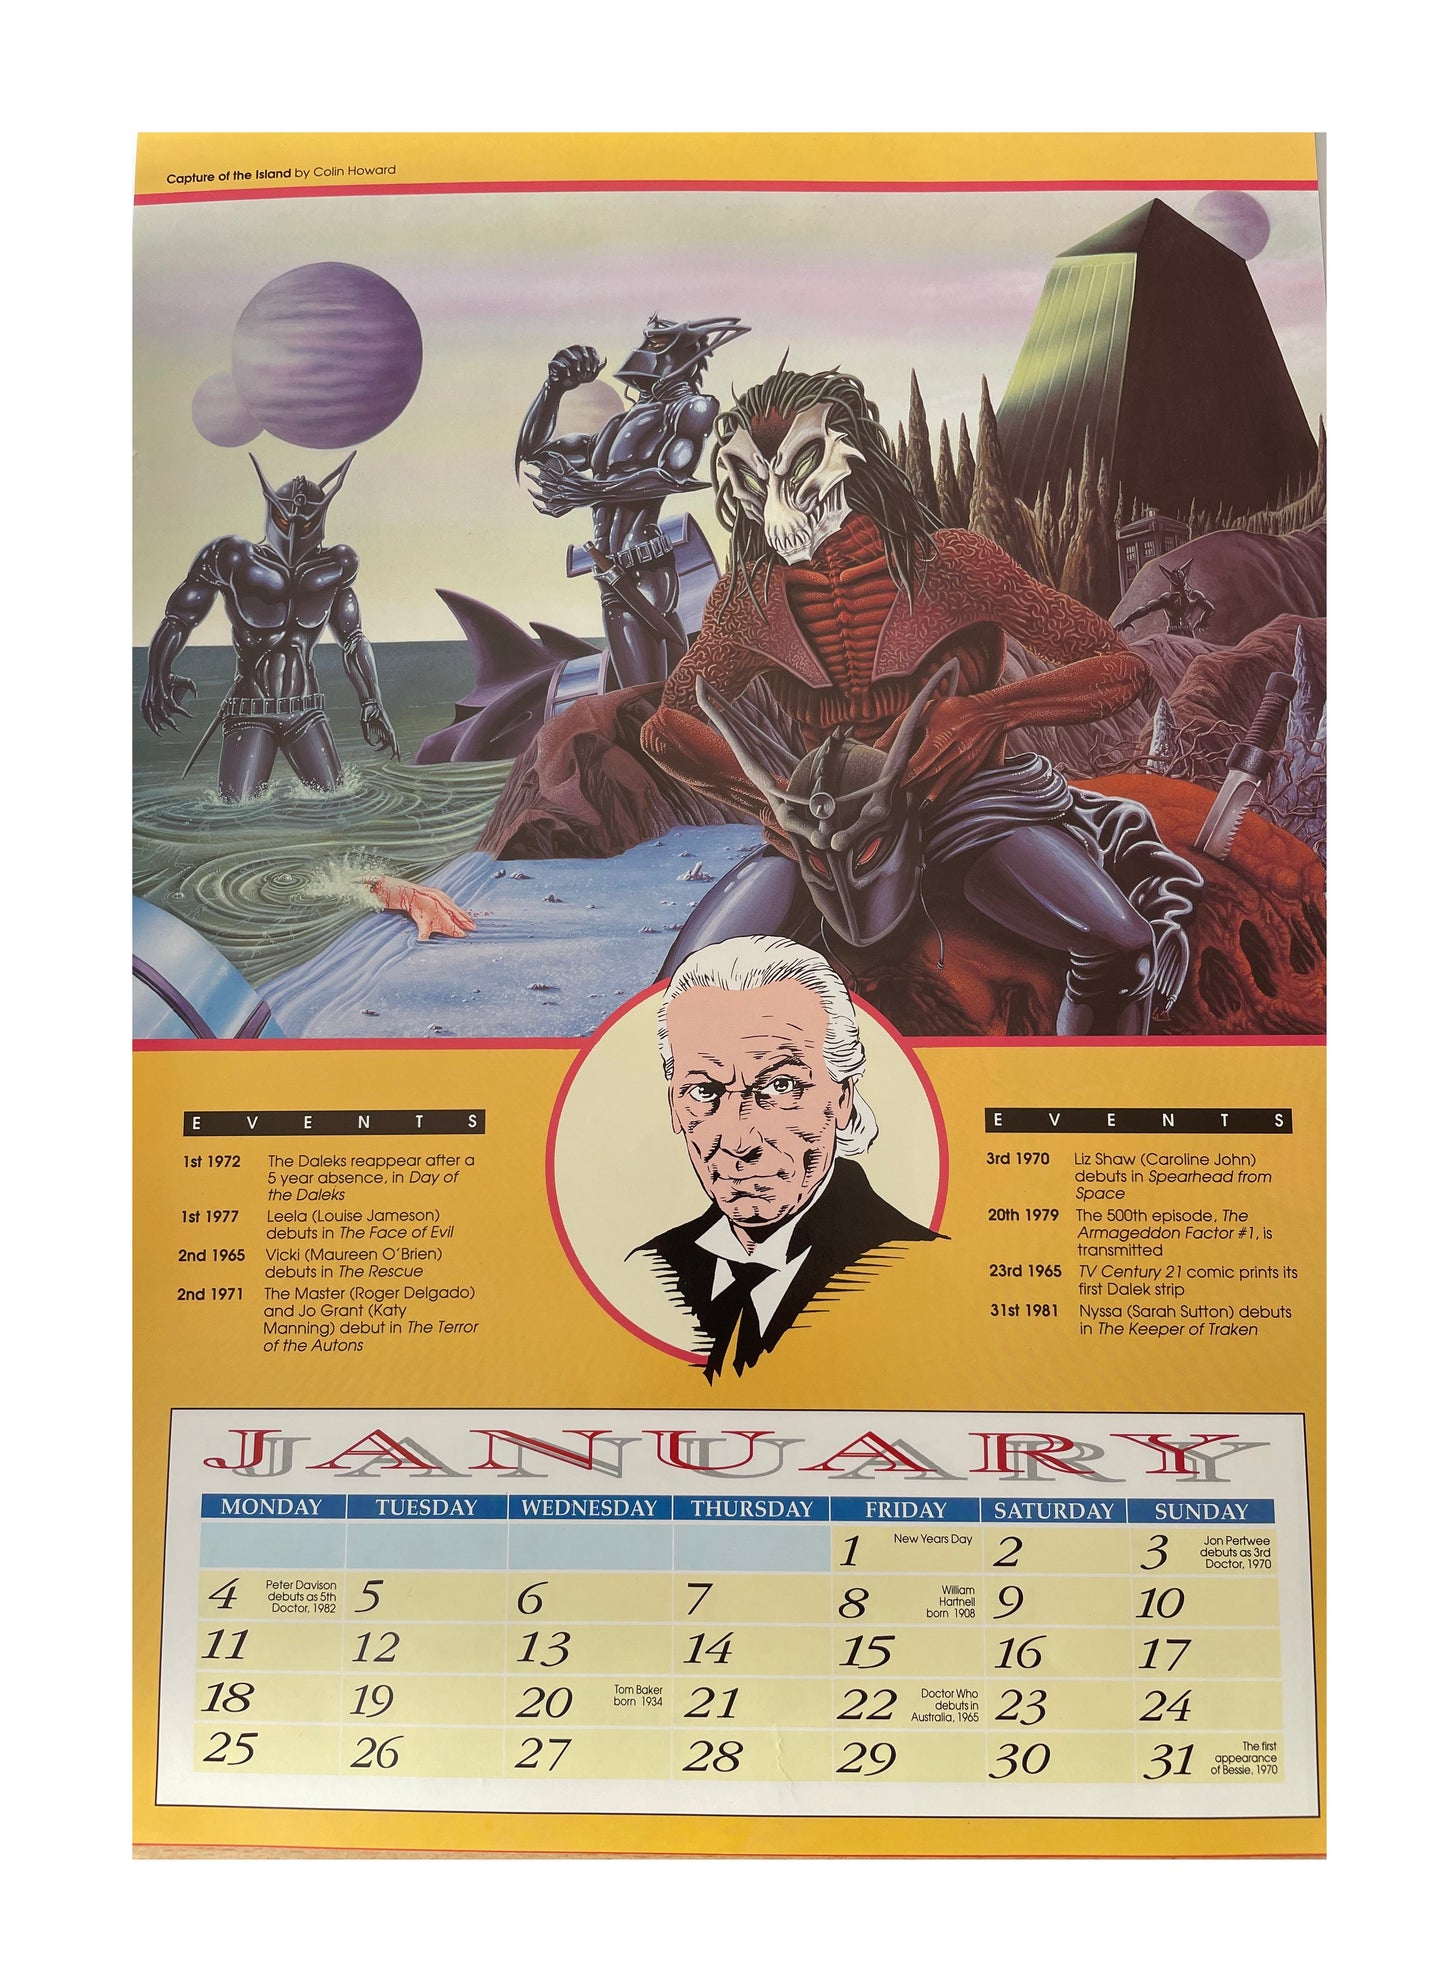 Vintage Doctor Dr Who 30th Anniversary Calendar 1993 - Official Artwork - Limited Edition - Former Shop Stock